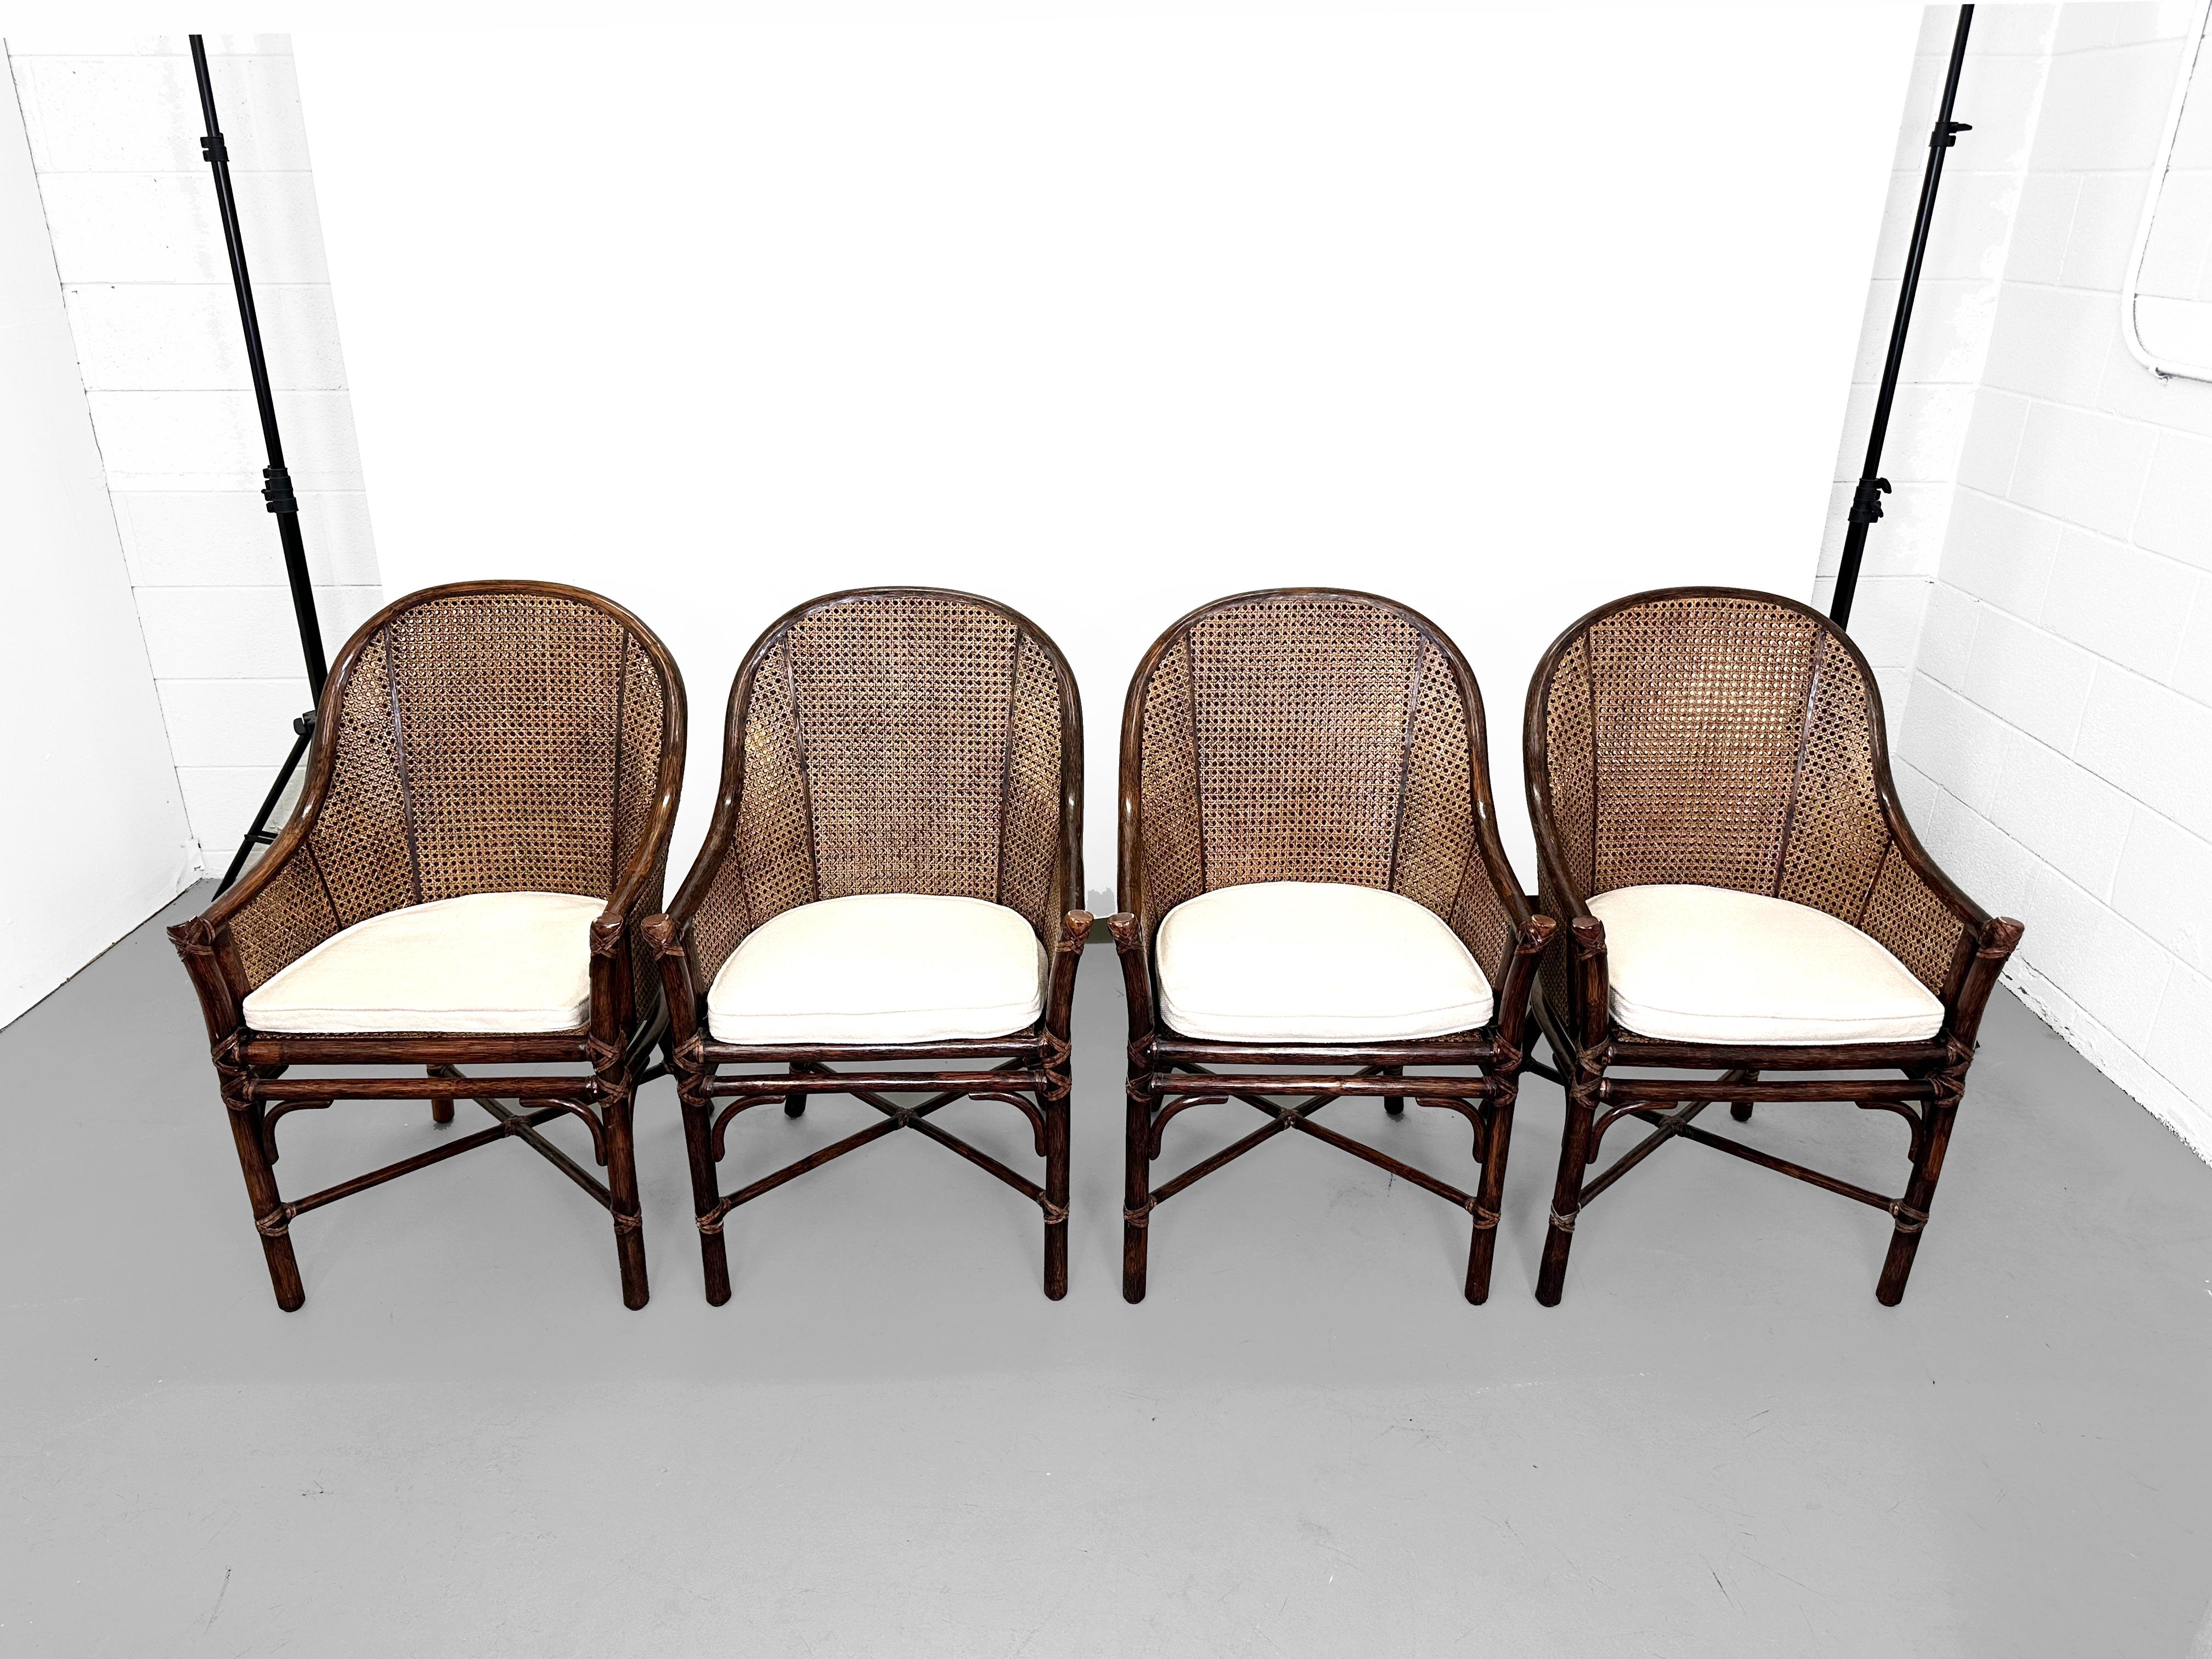 A gorgeous set of 4 Belden model dining chairs by Elinor McGuire. San Francisco, USA, 1987.

California coastal organic modern style, featuring thick rattan pole frames with a barrel back form inset with honeycomb cane on the back and sides. The